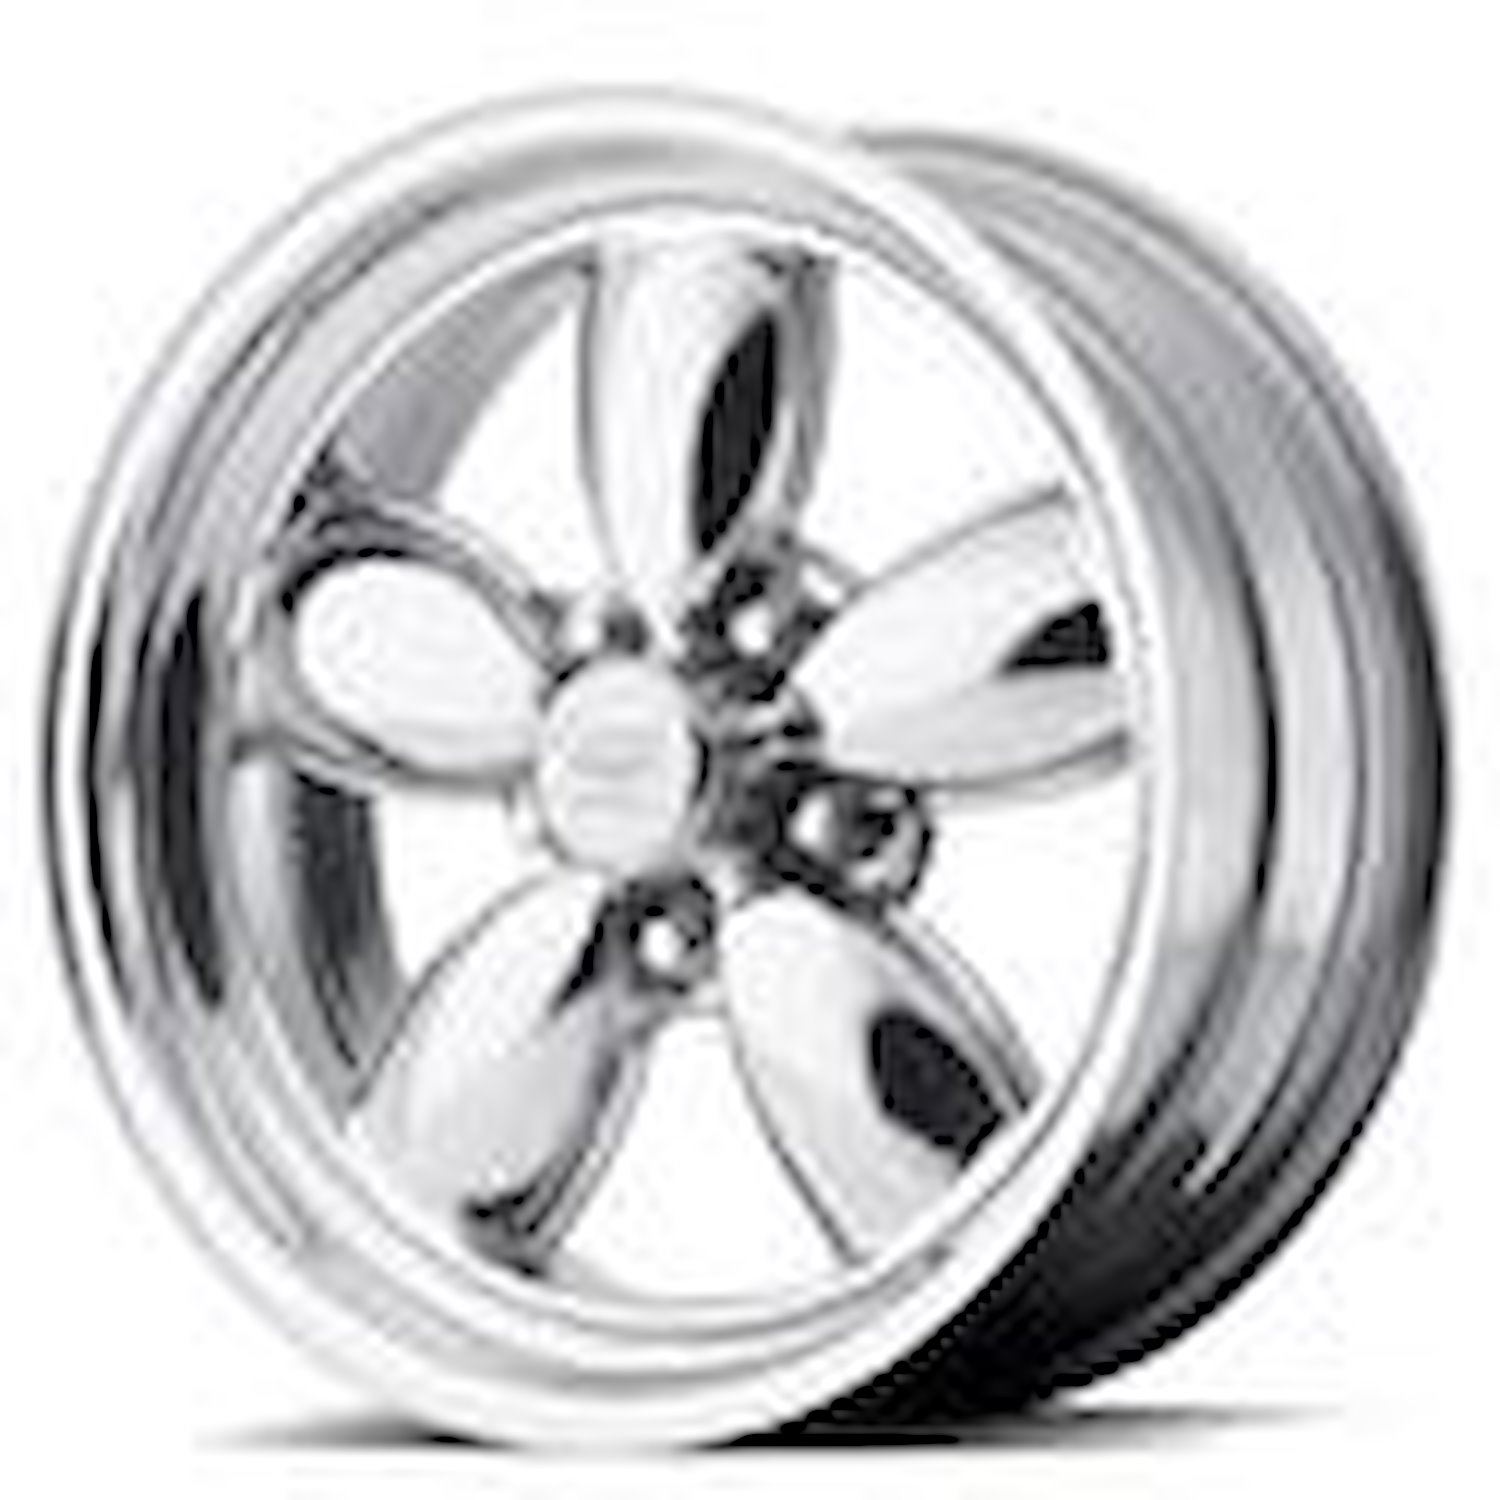 AMERICAN RACING CLASSIC 200S TWO-PIECE POLISHED 17 x 9.5 5X4.75 32 6.51